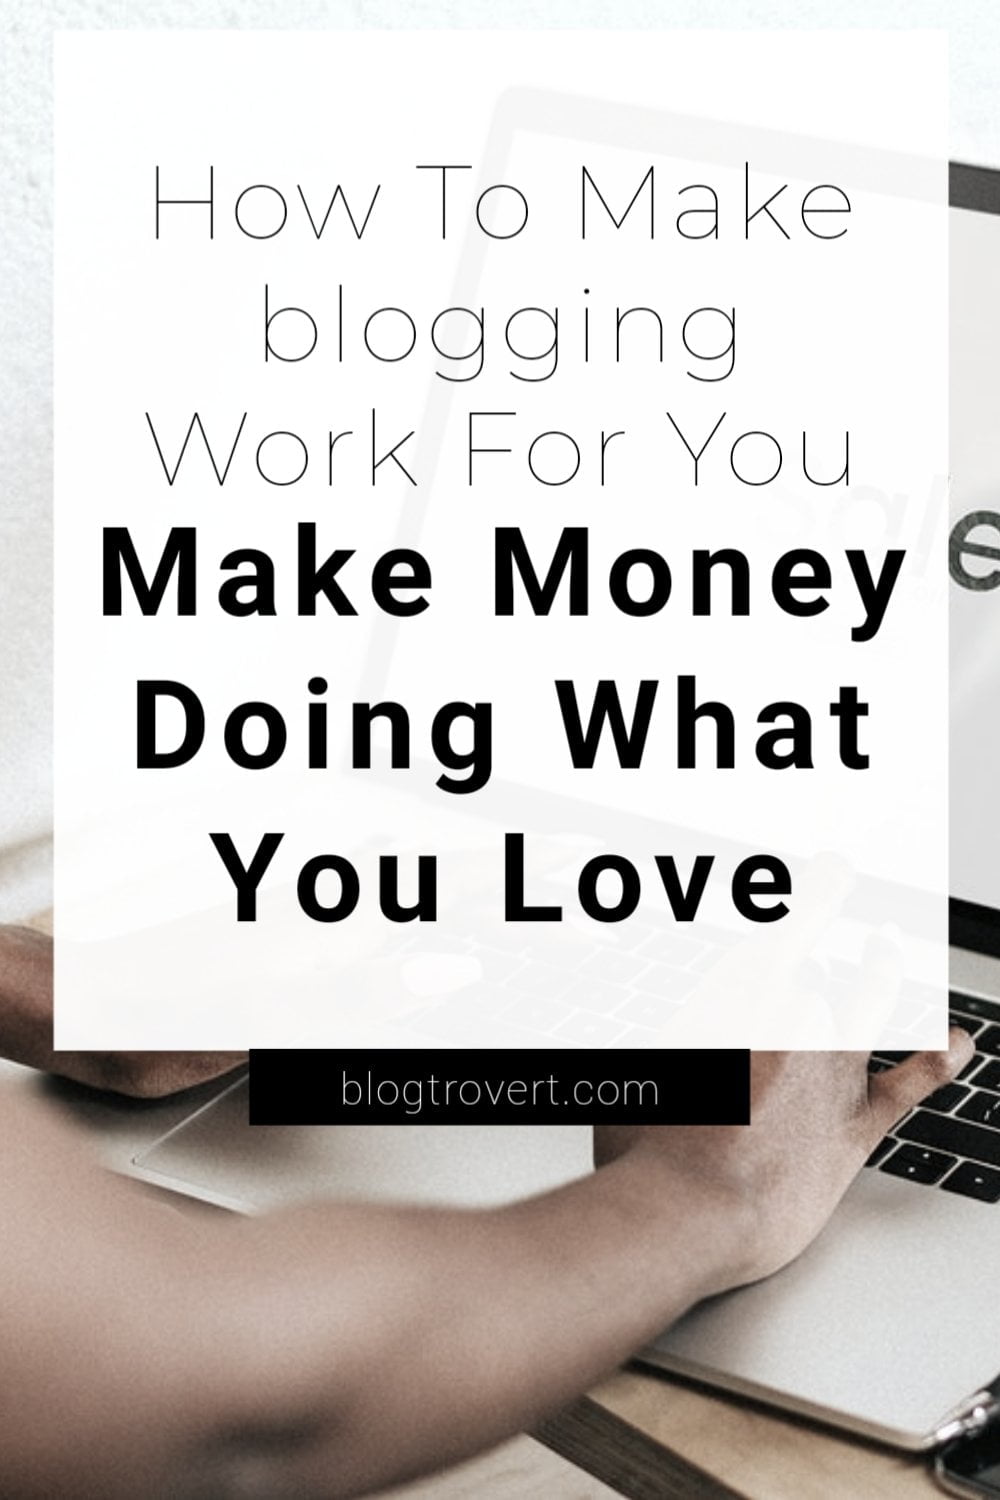 Blogging For Money: How To Stop Pressurizing Yourself And Make It Work 2